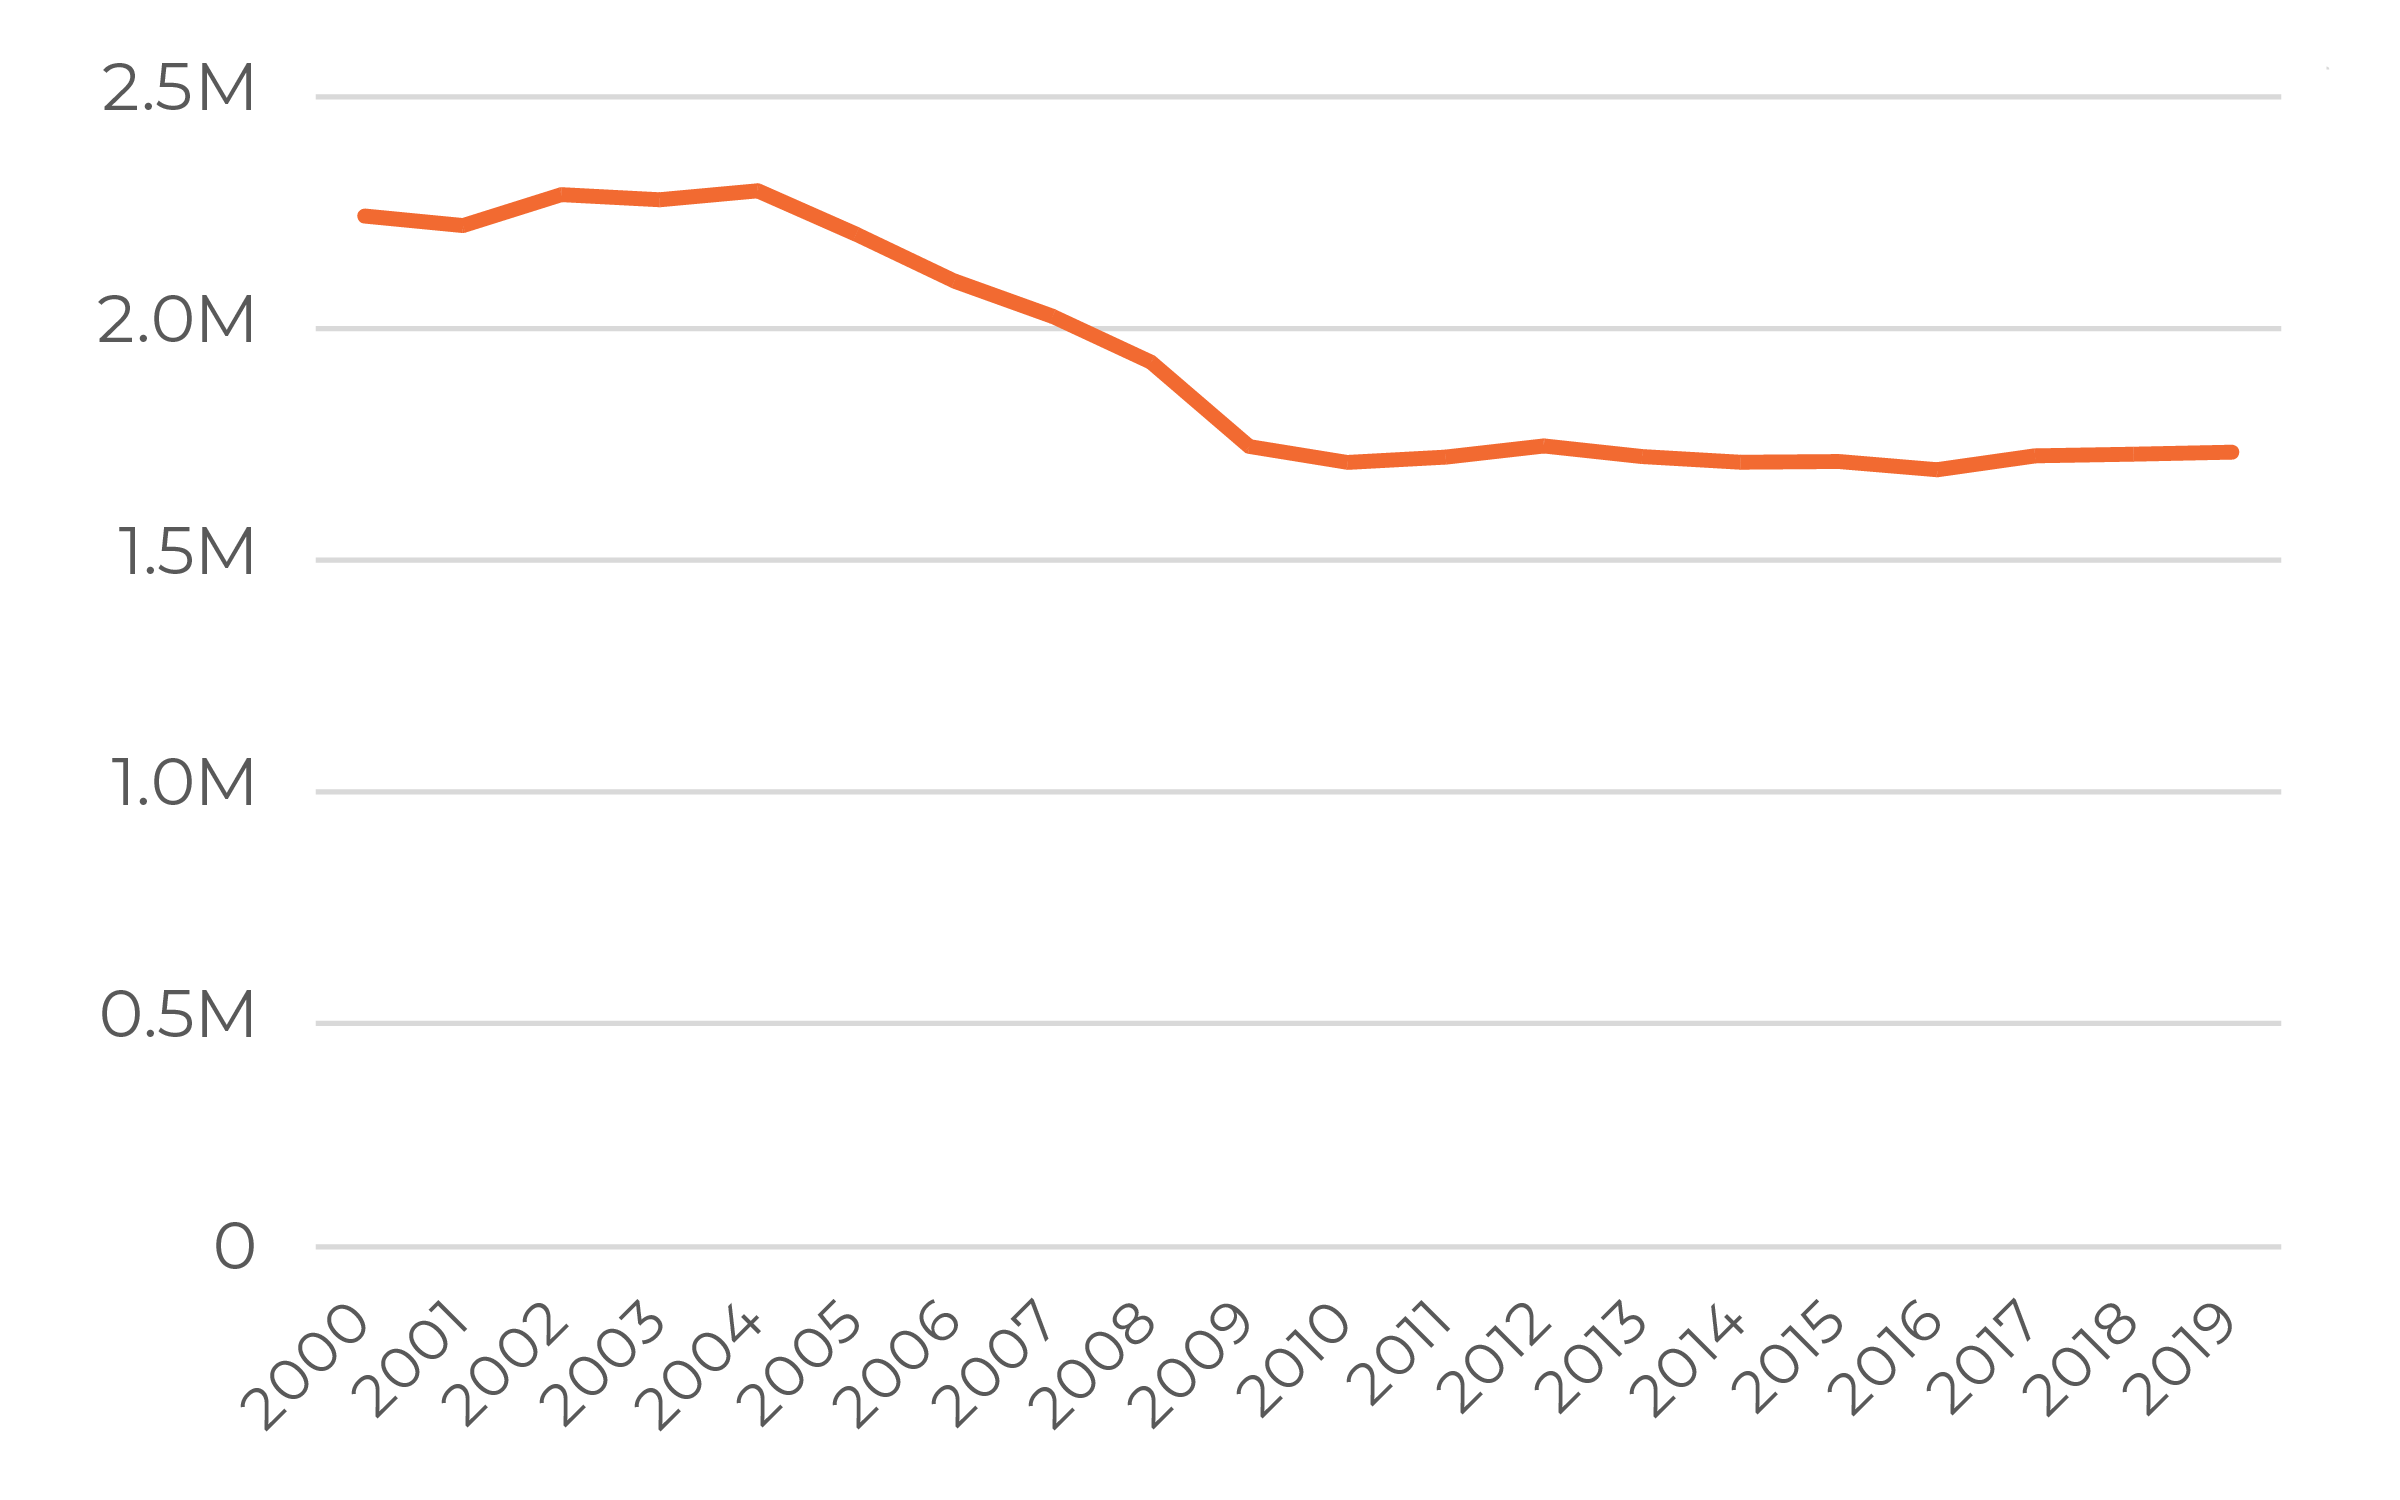 Figure 1. Manufacturing Employment in Canada, 2000 to 2019